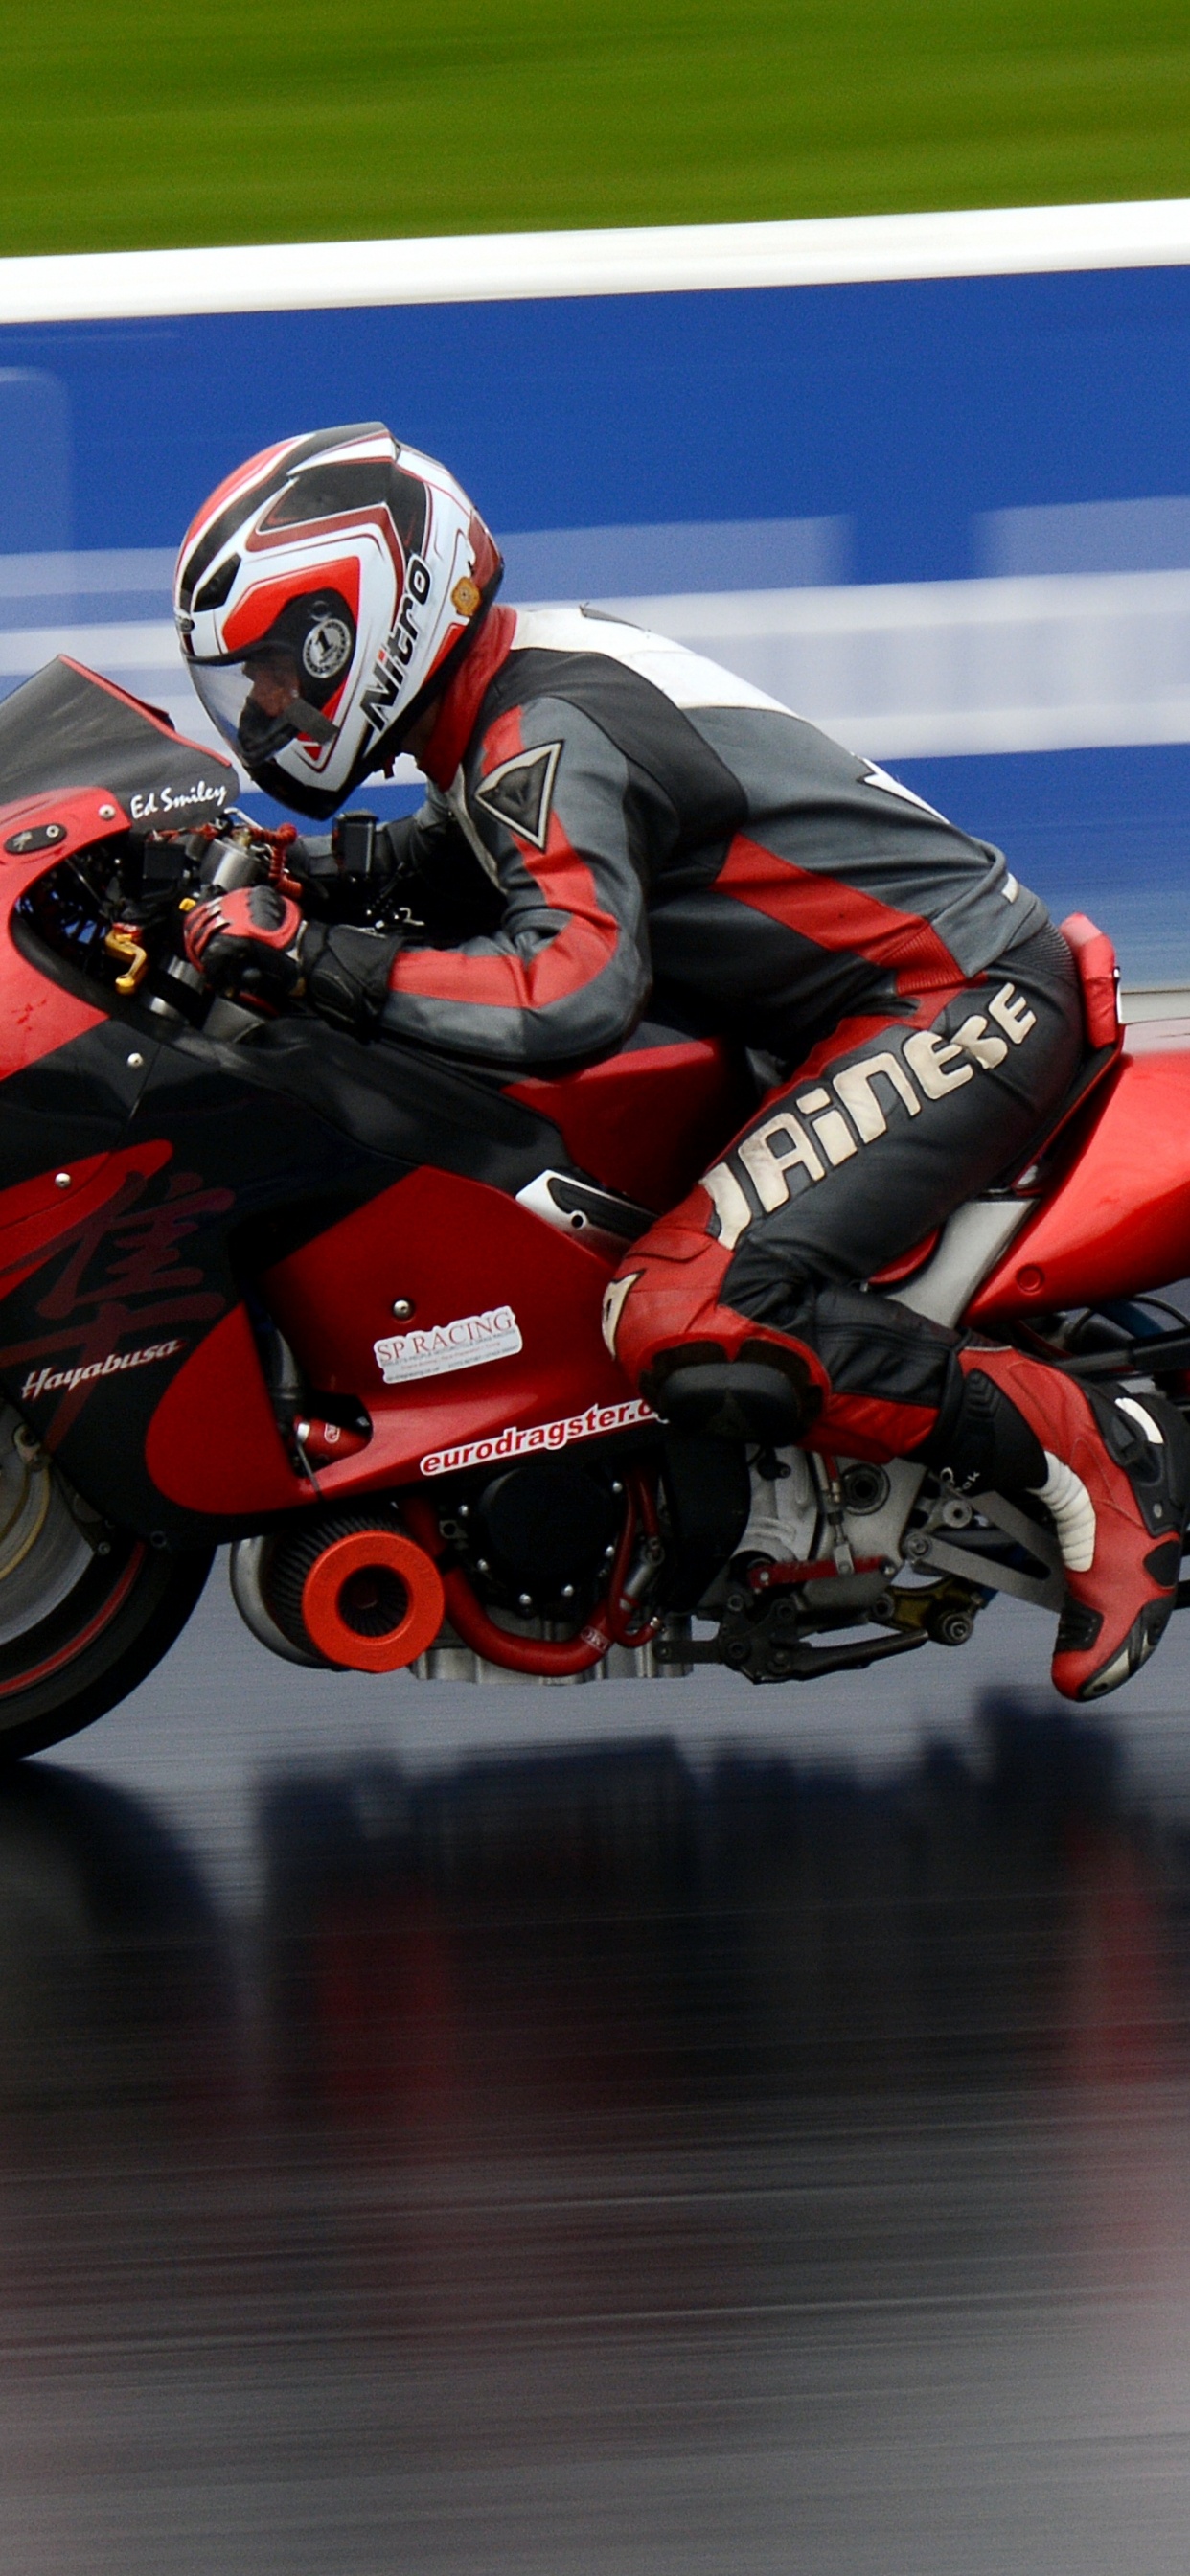 Man in Red and Black Motorcycle Helmet Riding Red Sports Bike. Wallpaper in 1242x2688 Resolution